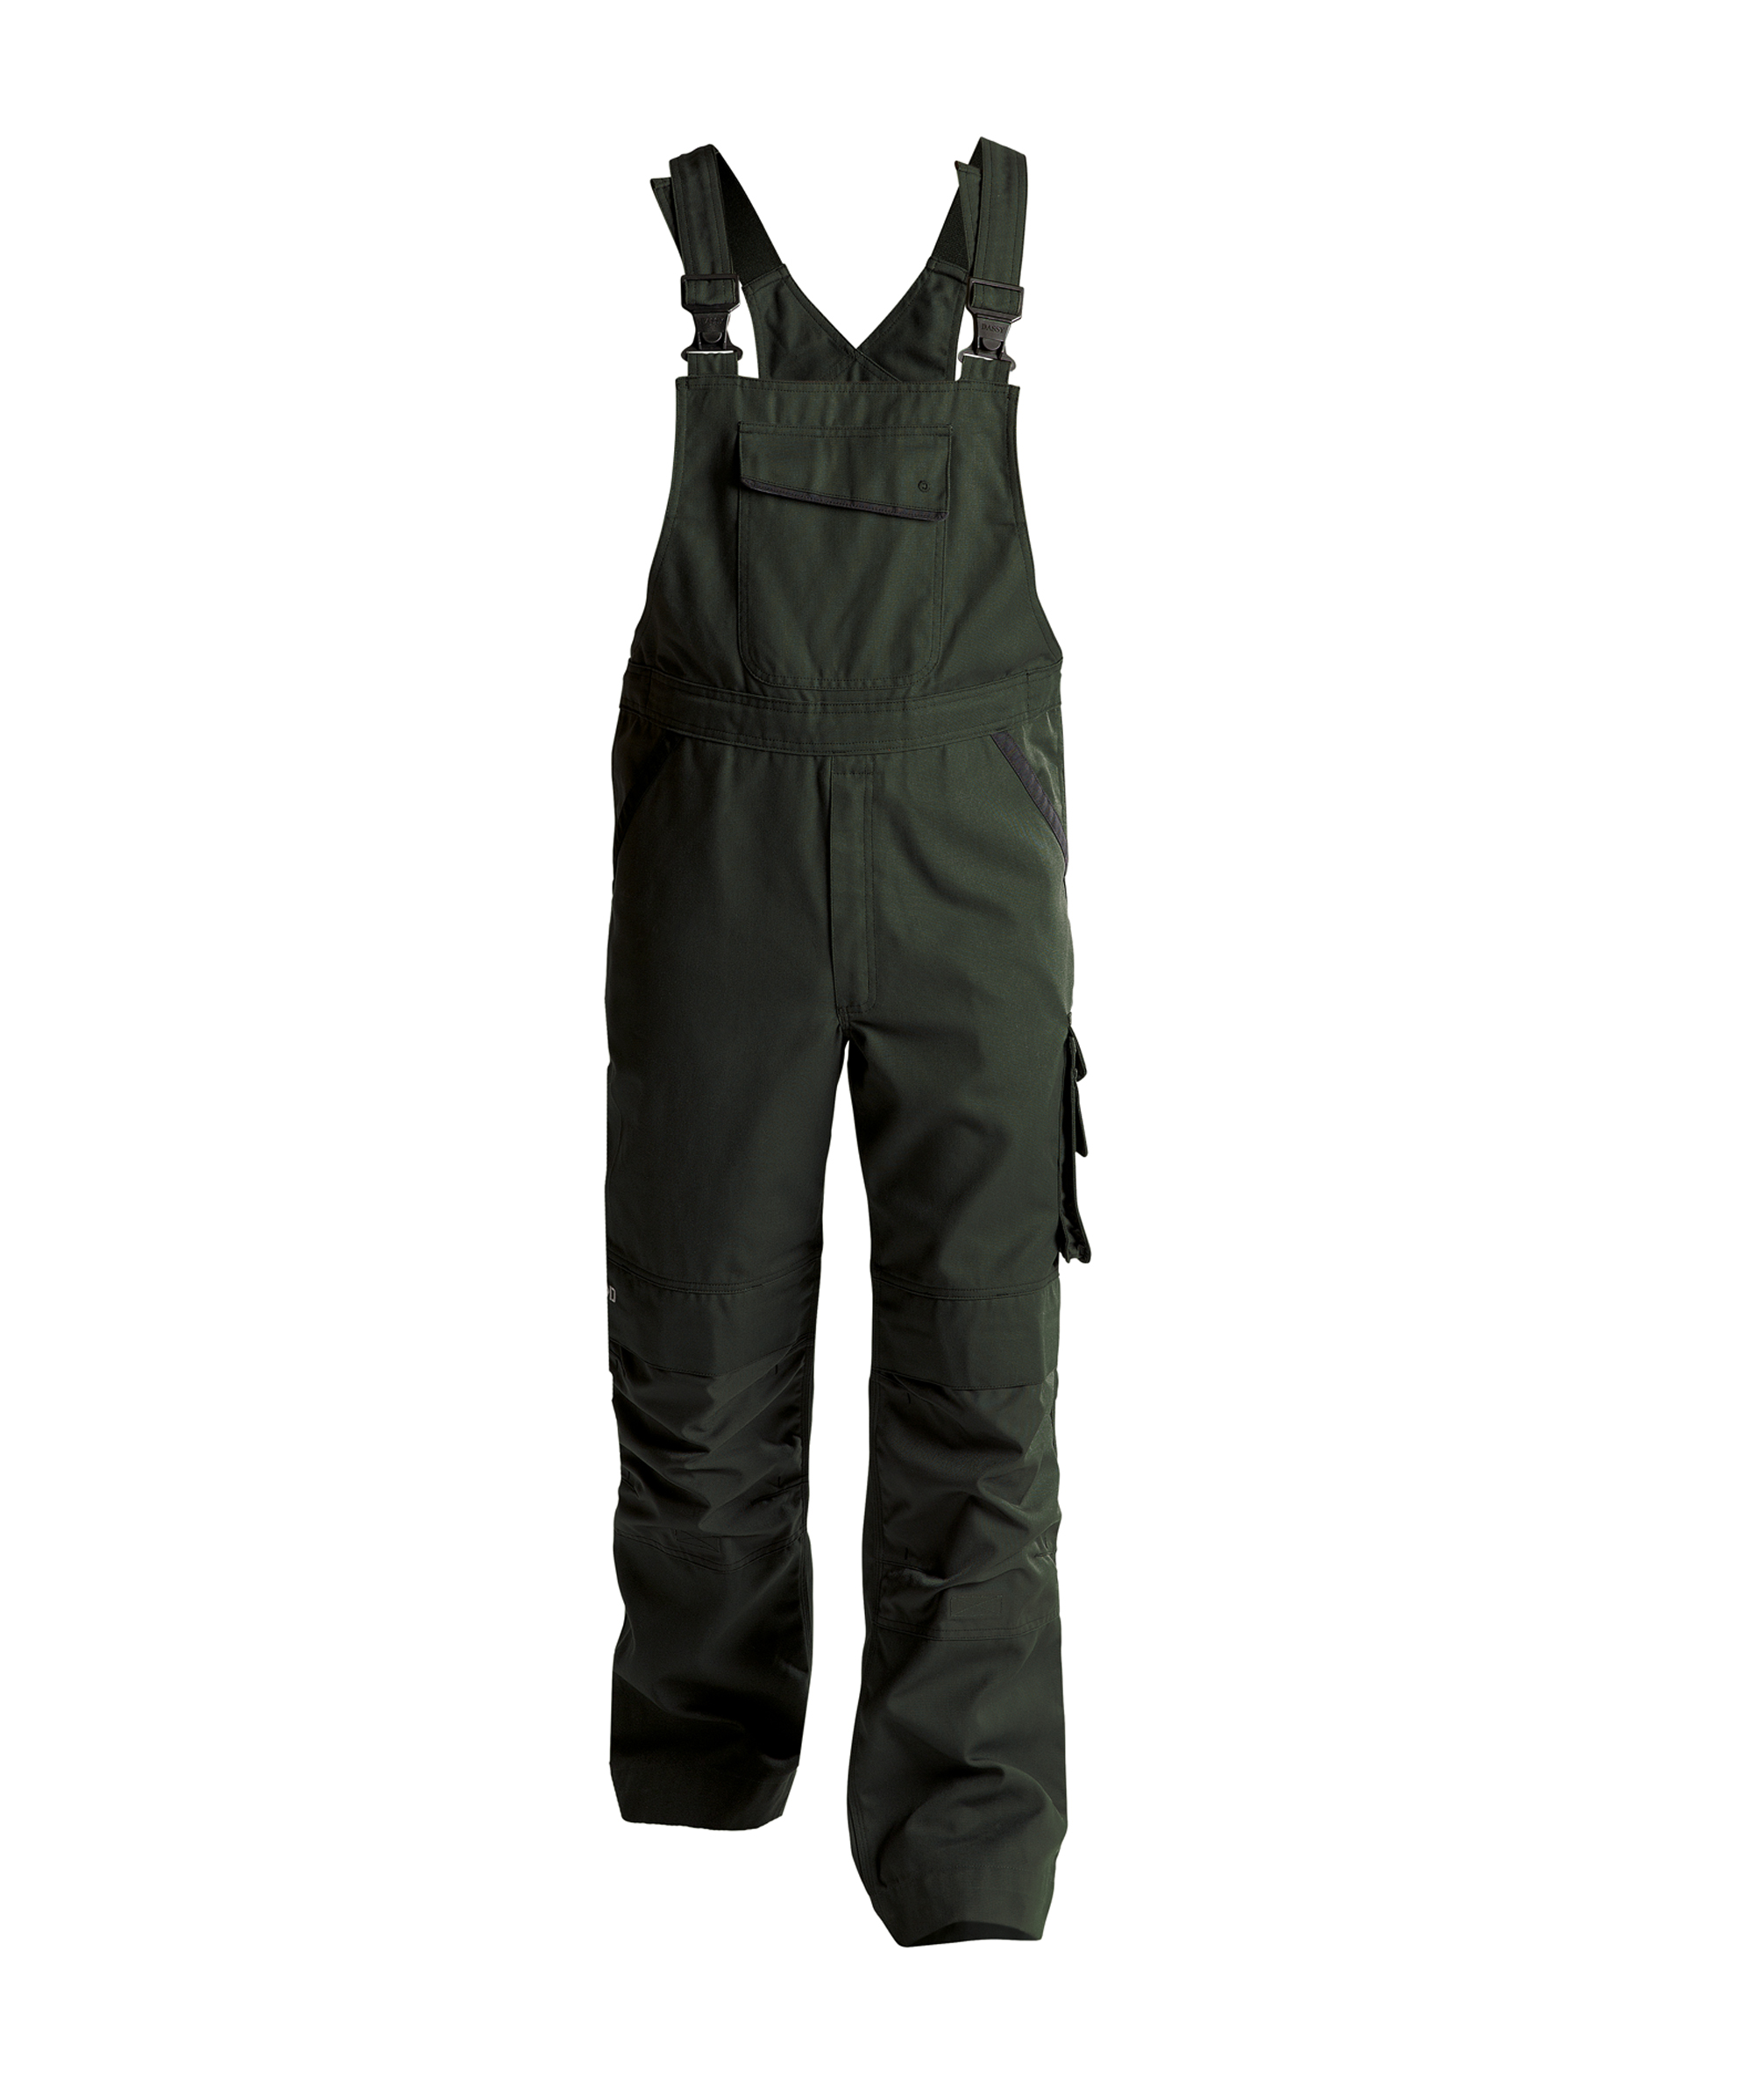 bolt_canvas-brace-overall-with-knee-pockets_moss-green-black_front.jpg